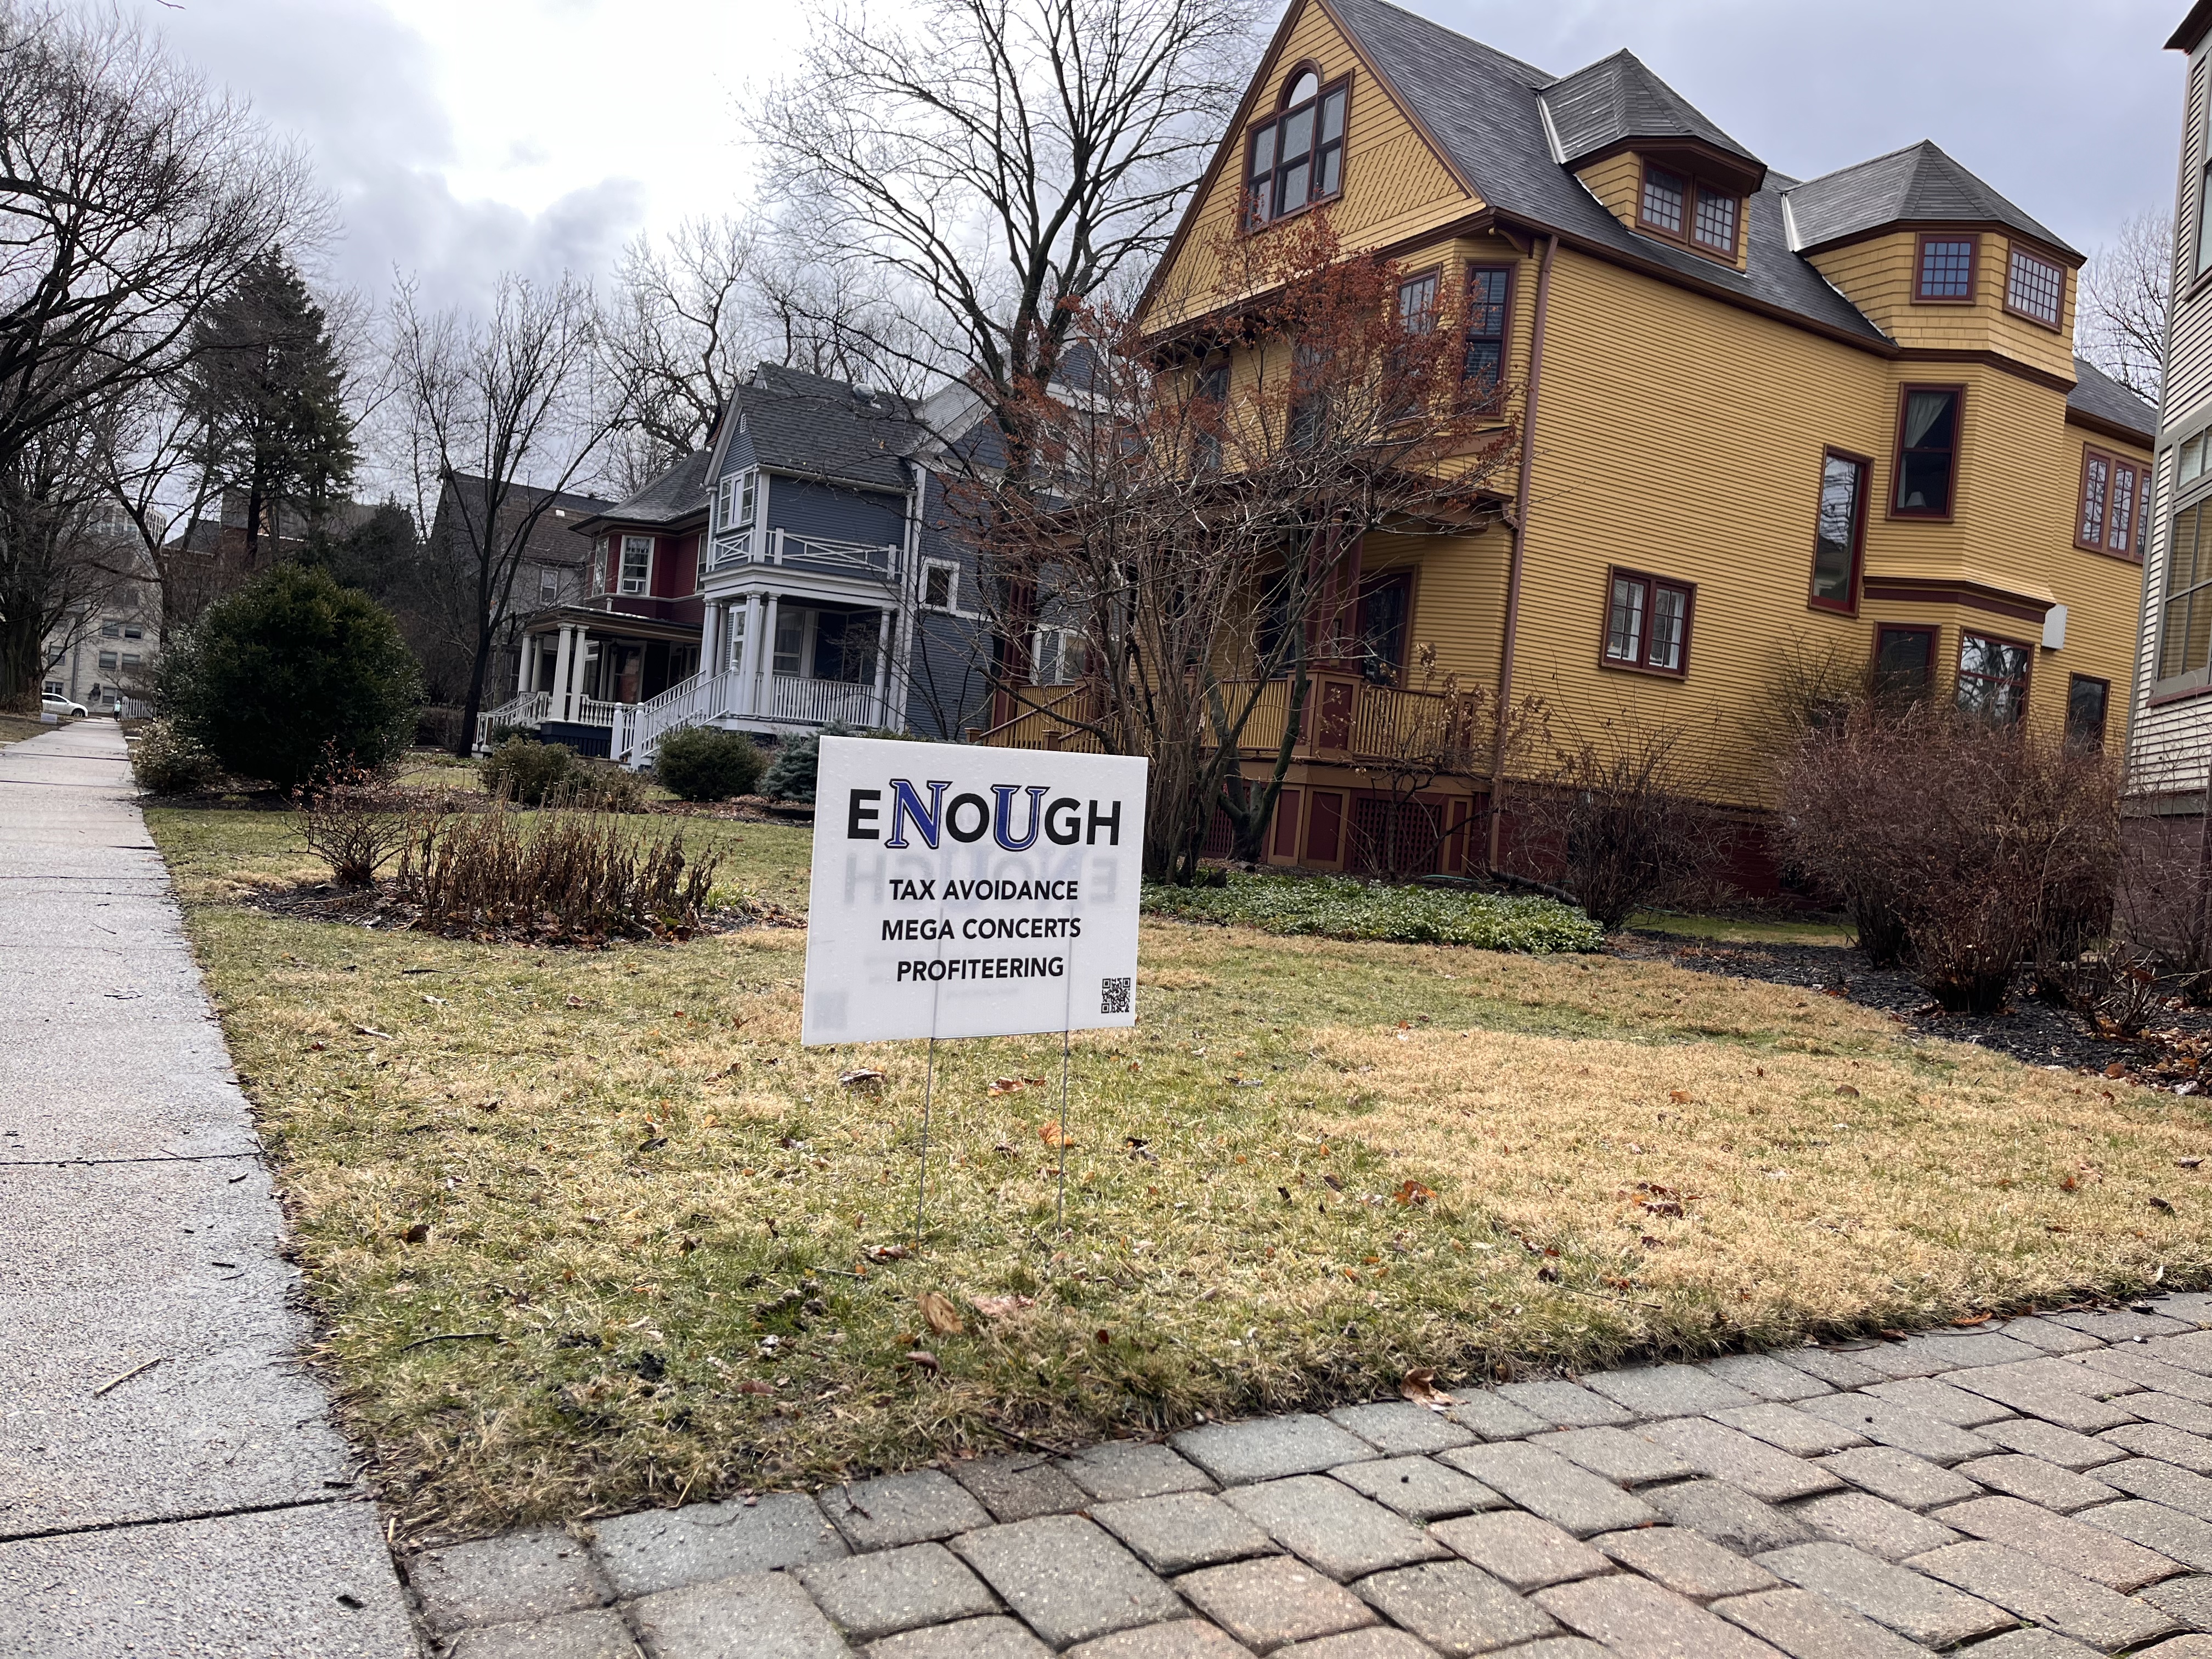 A yard sign staked in front of a yellow house that says 'Enough tax avoidance, mega concerts, profiteering.'